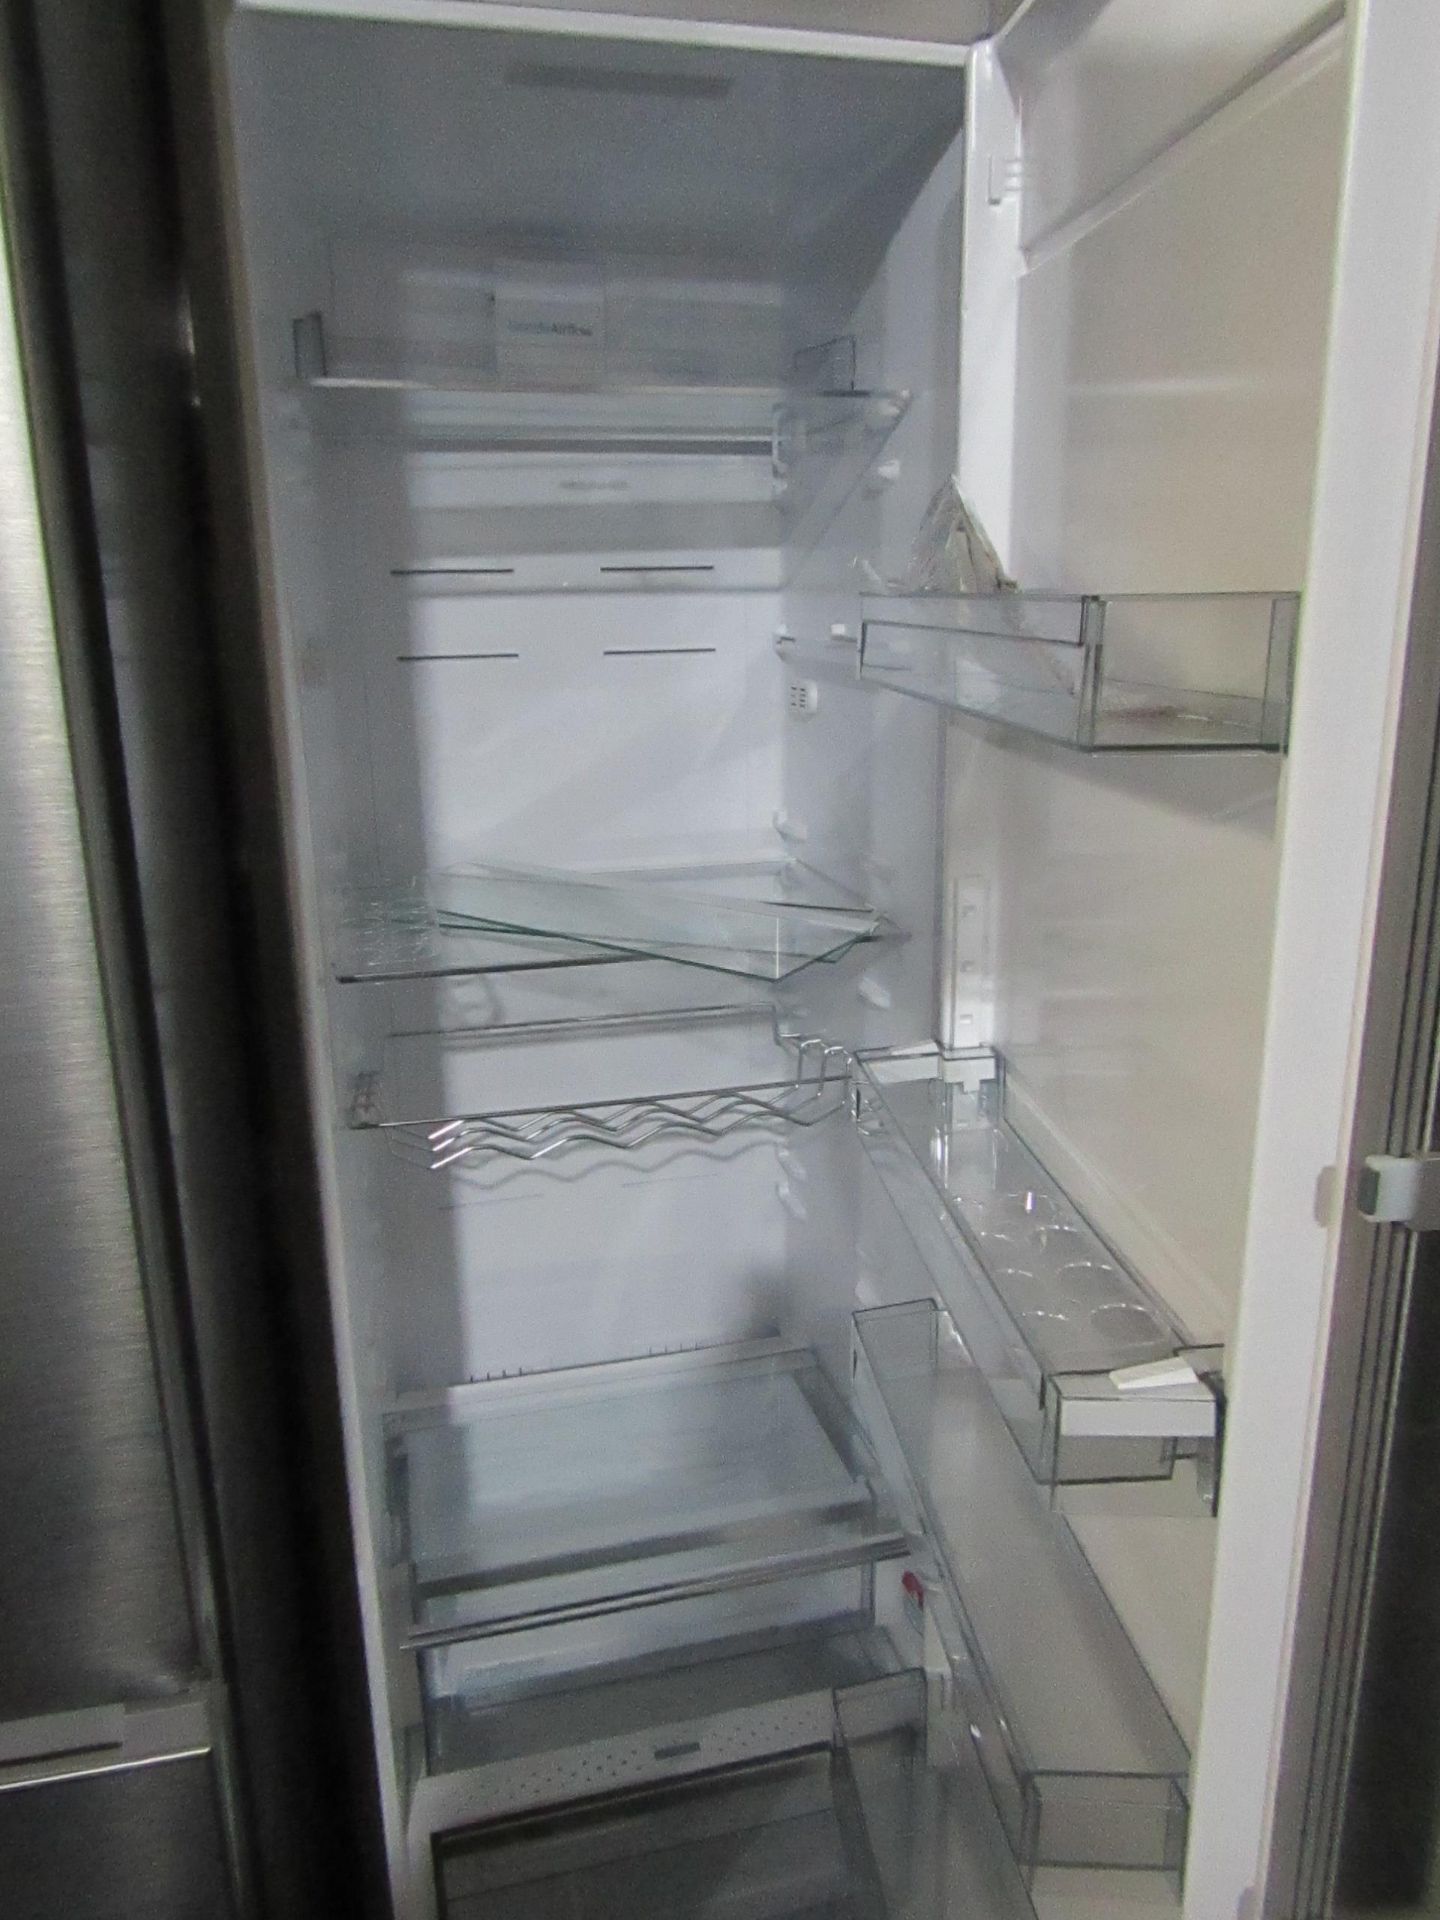 Sharp tall freestanding fridge, Clean Inside Marks Present On Bottom. - Powers On & Gets Cold. - Image 2 of 2